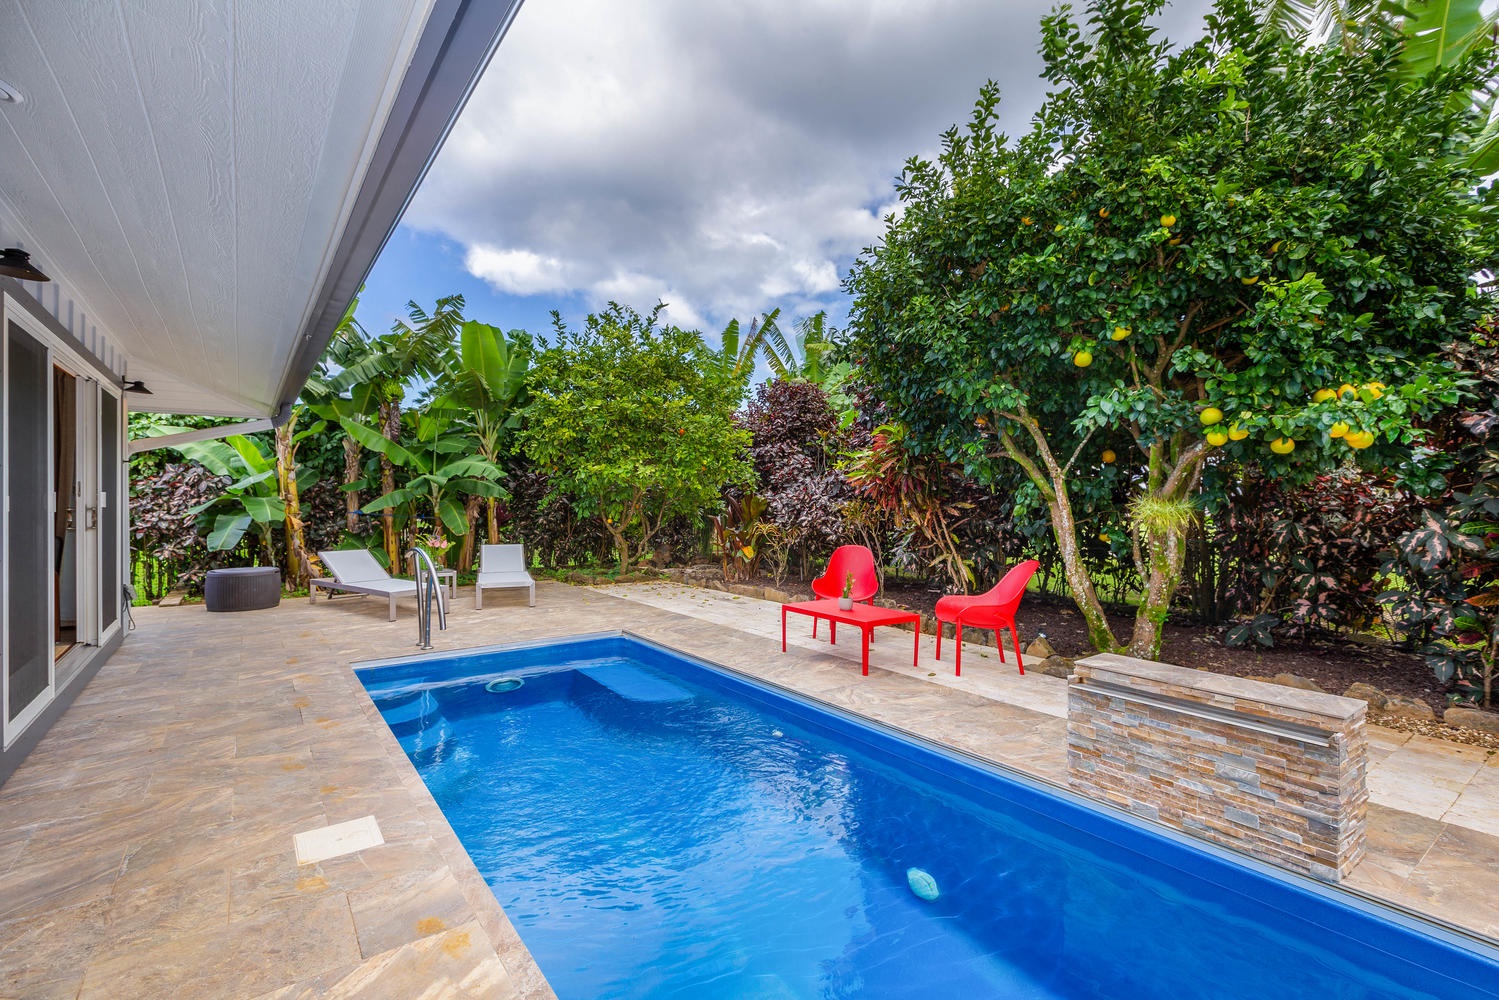 Princeville Vacation Rentals, Makana Lei - Cool down in the private pool or relax poolside!